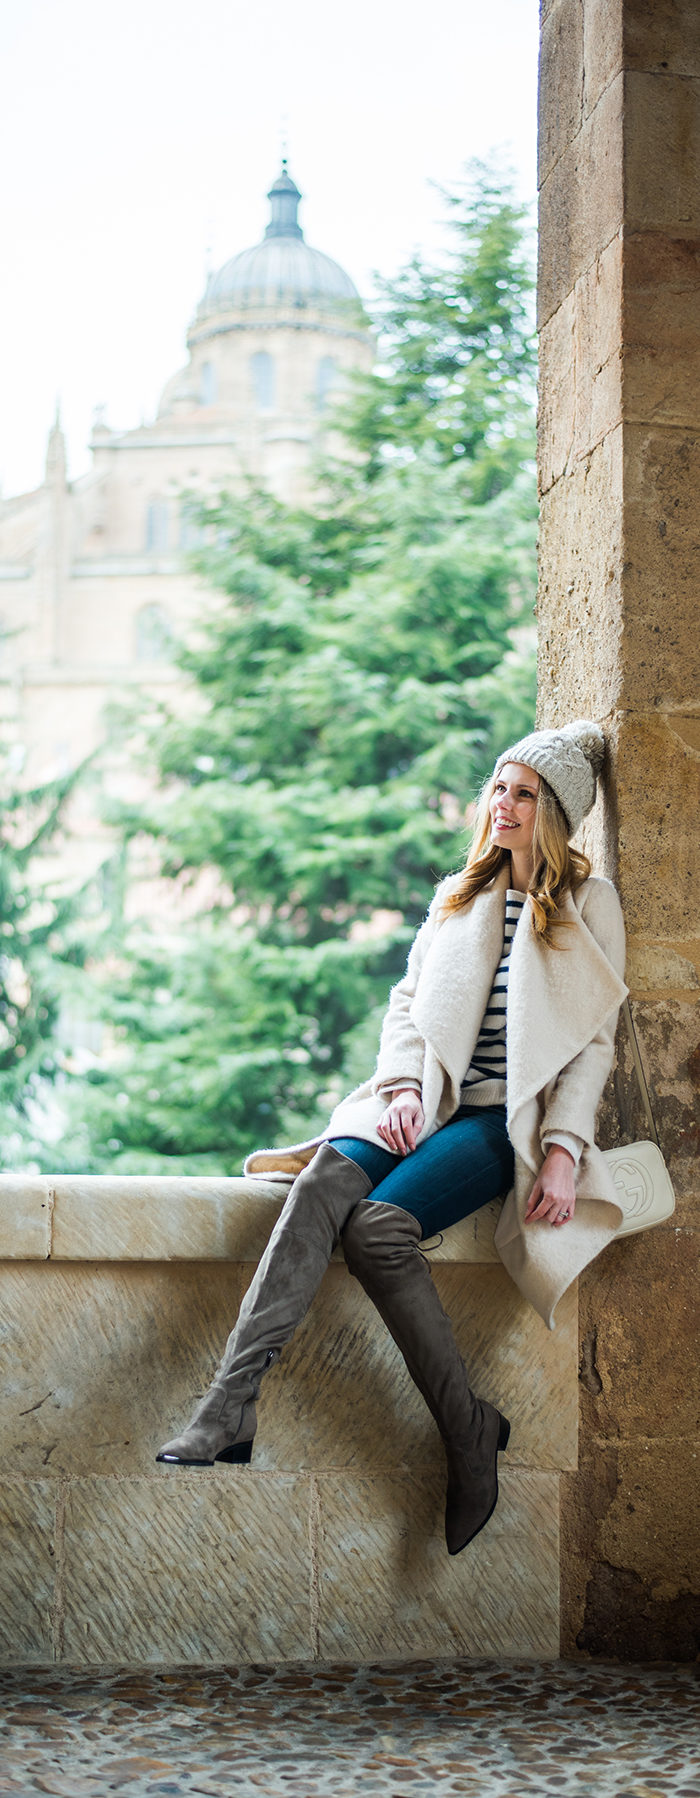 Alyssa Campanella of The A List blog sharing her favorite coats for fall and winter wearing Amanda Uprichard coat in Spain